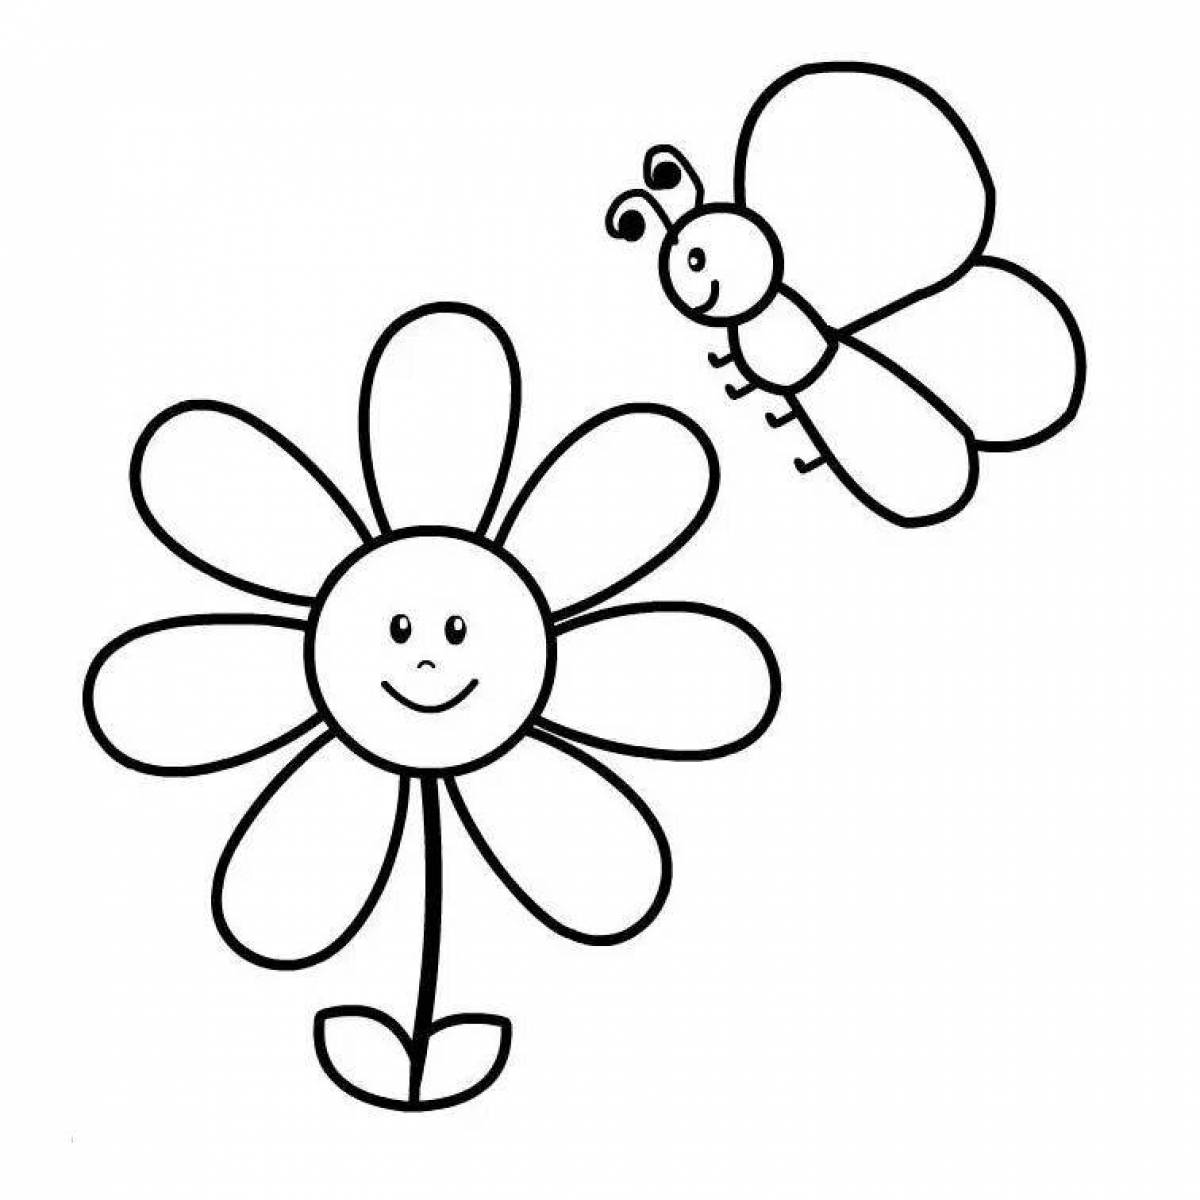 Delicate coloring flower template with seven colors